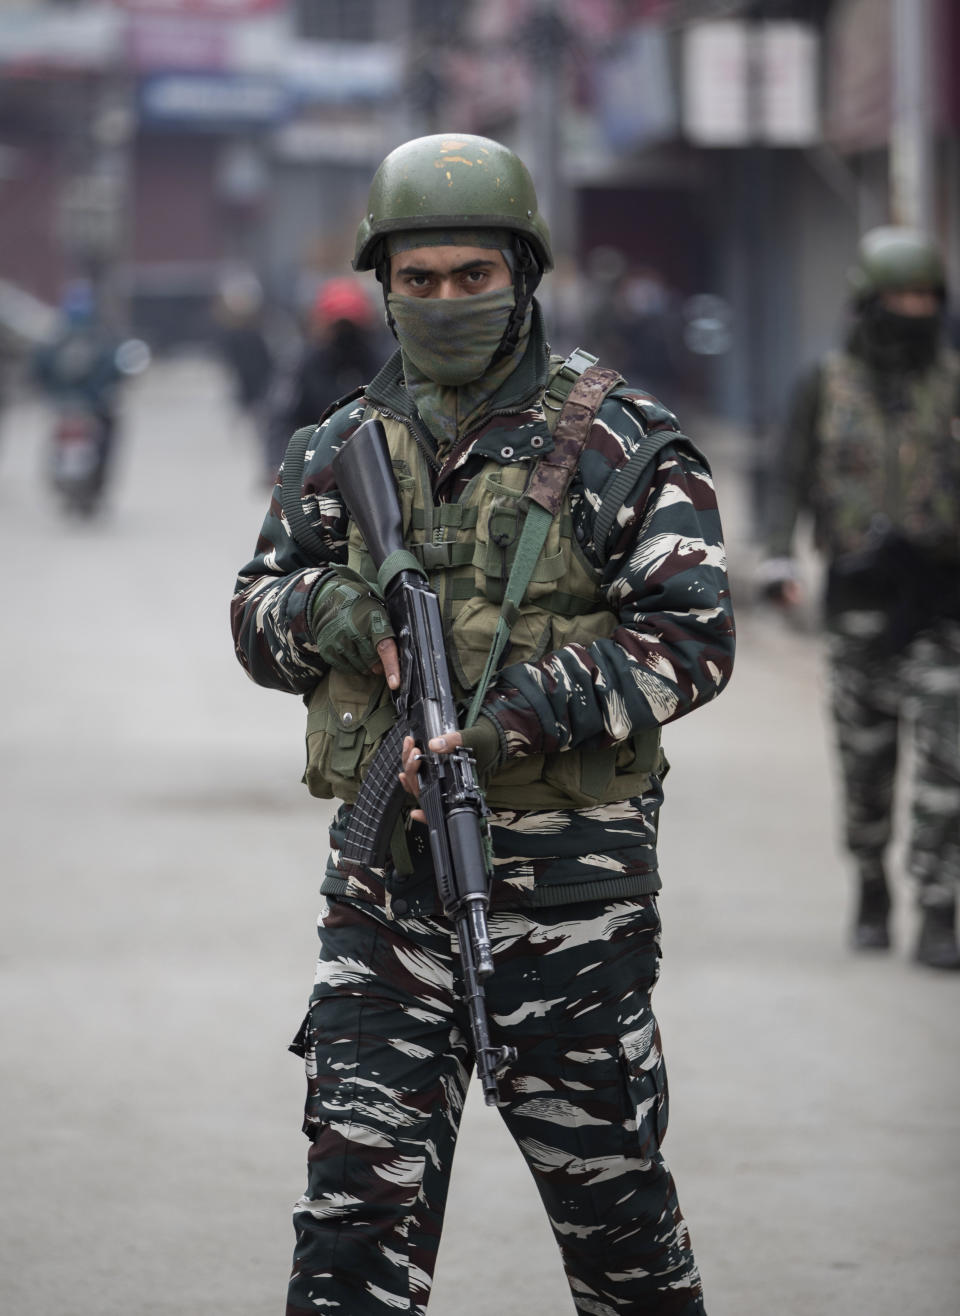 Indian paramilitary soldiers patrol through a closed market in Srinagar, Indian controlled Kashmir, Tuesday, Feb. 9, 2021. Businesses and shops have closed in many parts of Indian-controlled Kashmir to mark the eighth anniversary of the secret execution of a Kashmiri man in New Delhi. Hundreds of armed police and paramilitary soldiers in riot gear patrolled as most residents stayed indoors in the disputed region's main city of Srinagar. (AP Photo/Mukhtar Khan)